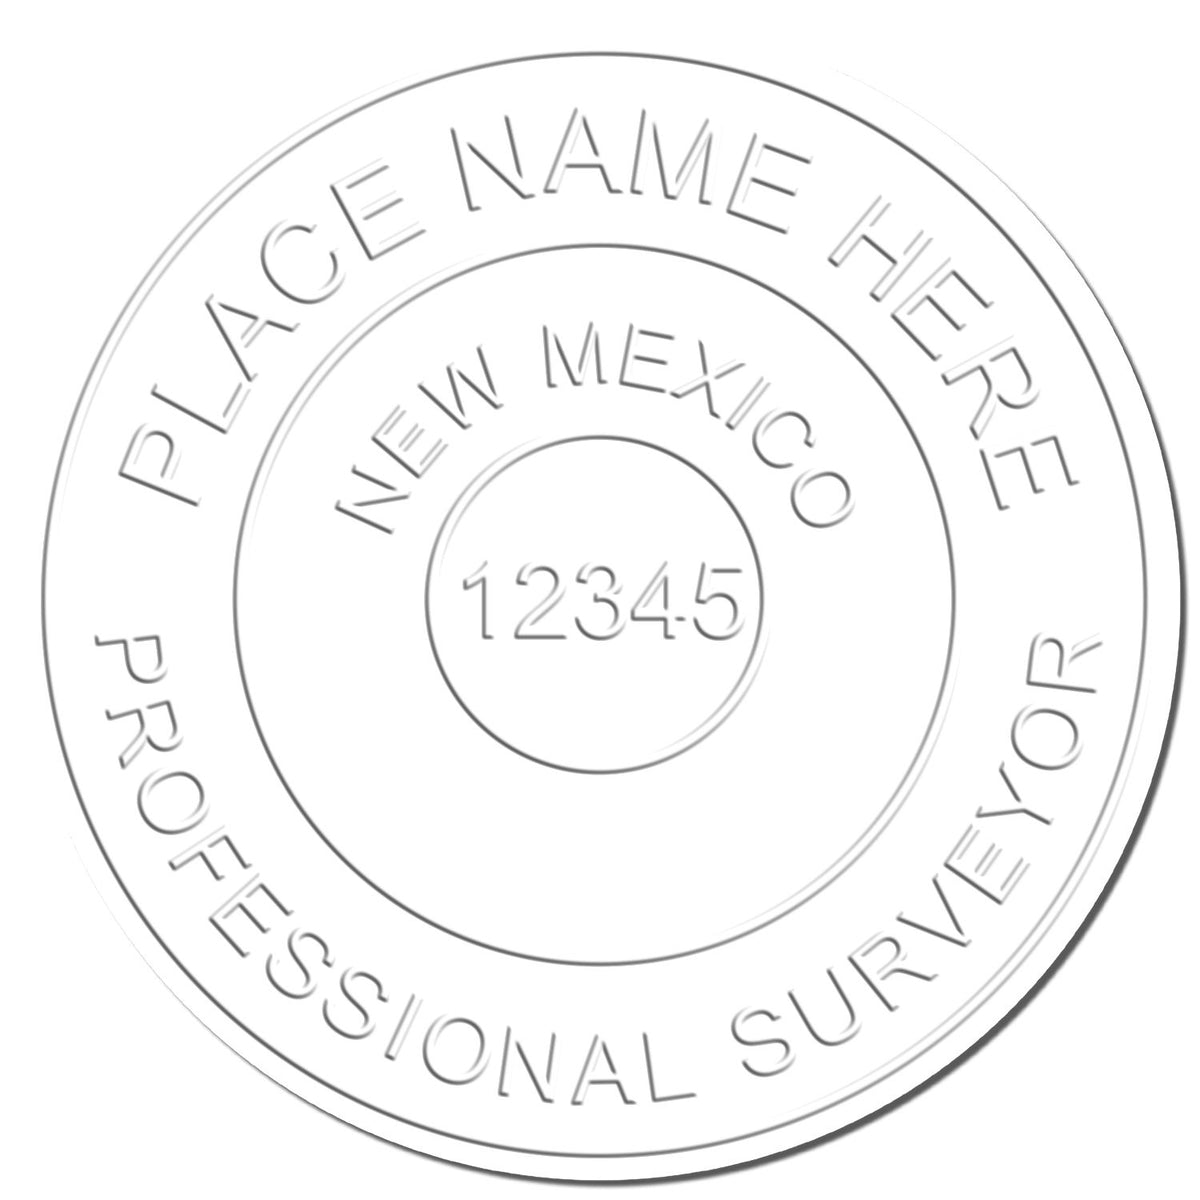 This paper is stamped with a sample imprint of the Hybrid New Mexico Land Surveyor Seal, signifying its quality and reliability.